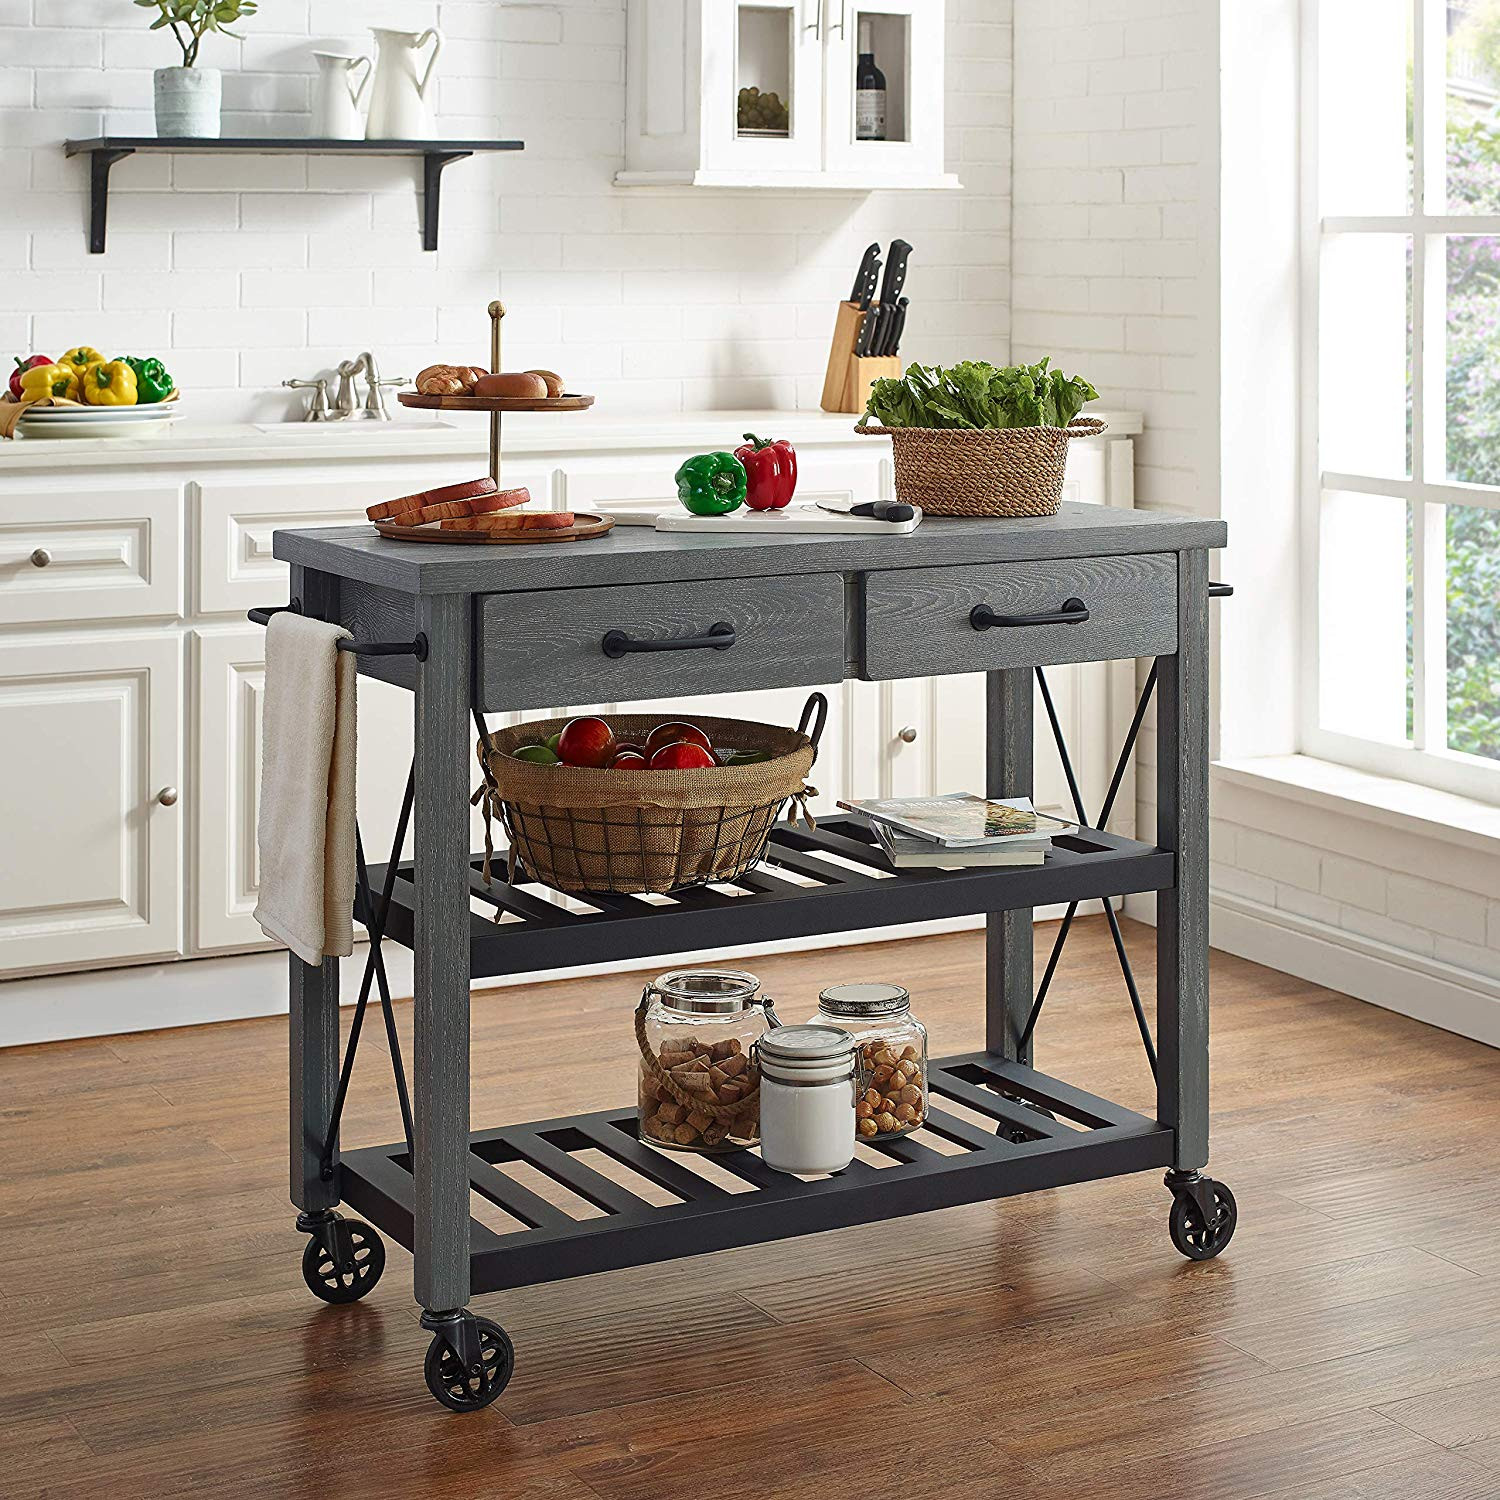 Small Rolling Kitchen Island
 10 Best Selling Small Rolling Kitchen Islands on Amazon